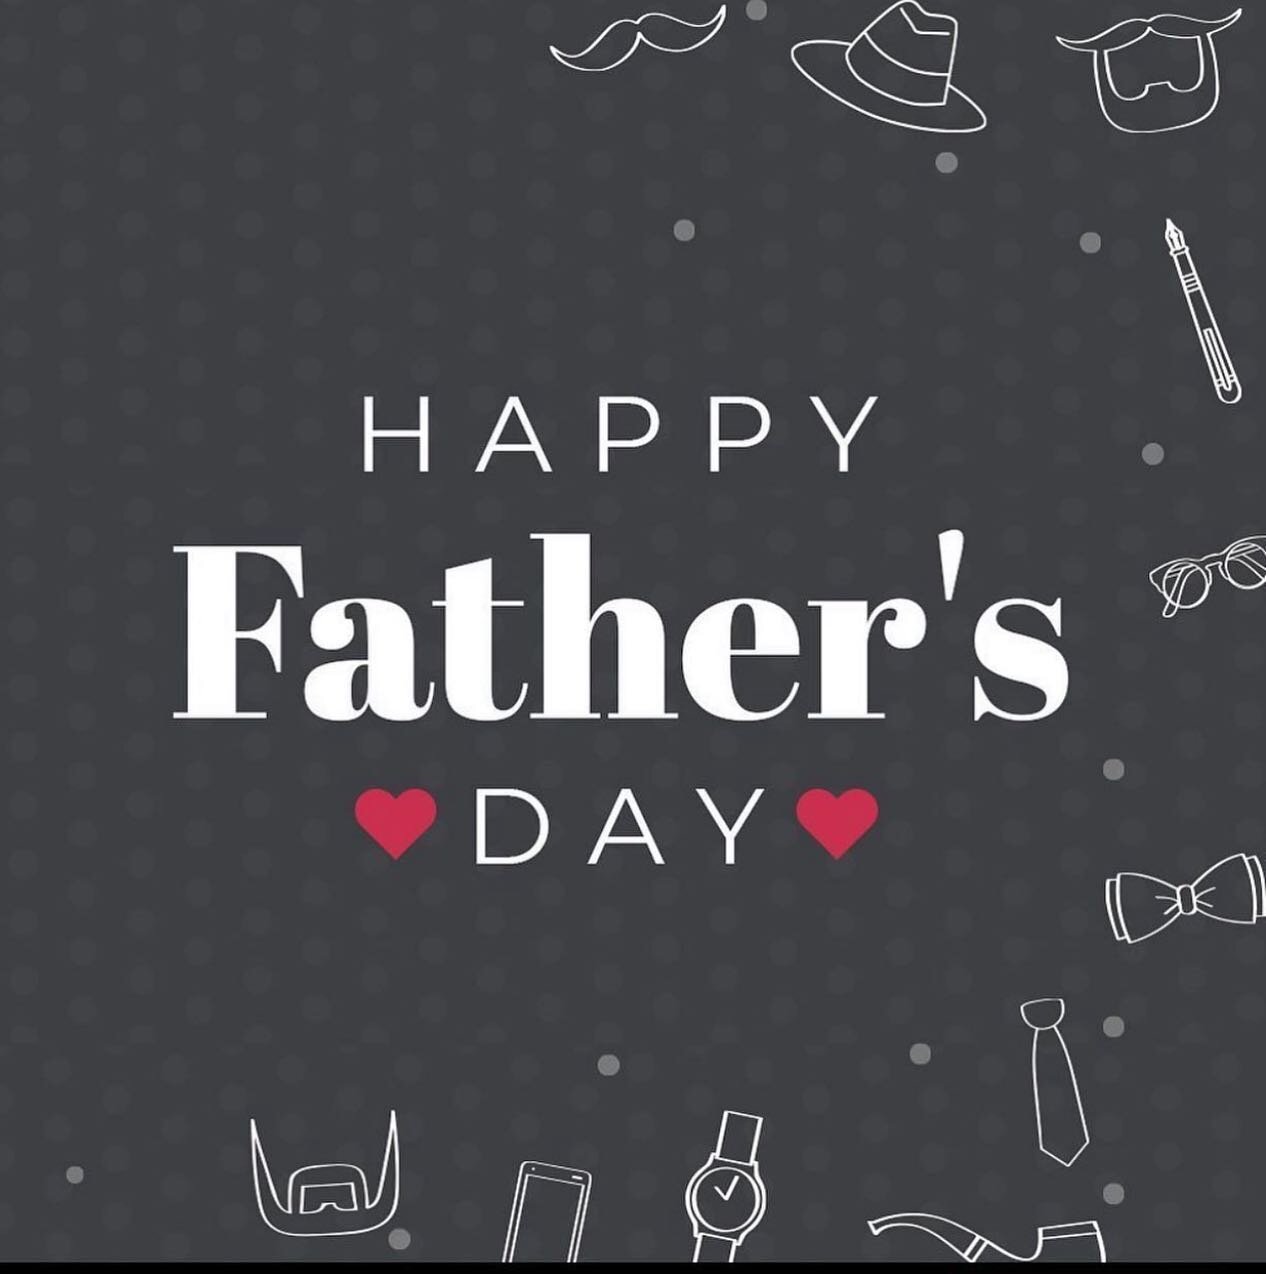 Wishing a very Happy Fathers Day to all the wonderful dads out there!💙You are so appreciated and we always love pampering you✨#father #fathersday #dad #dads #family #june #nailgarden